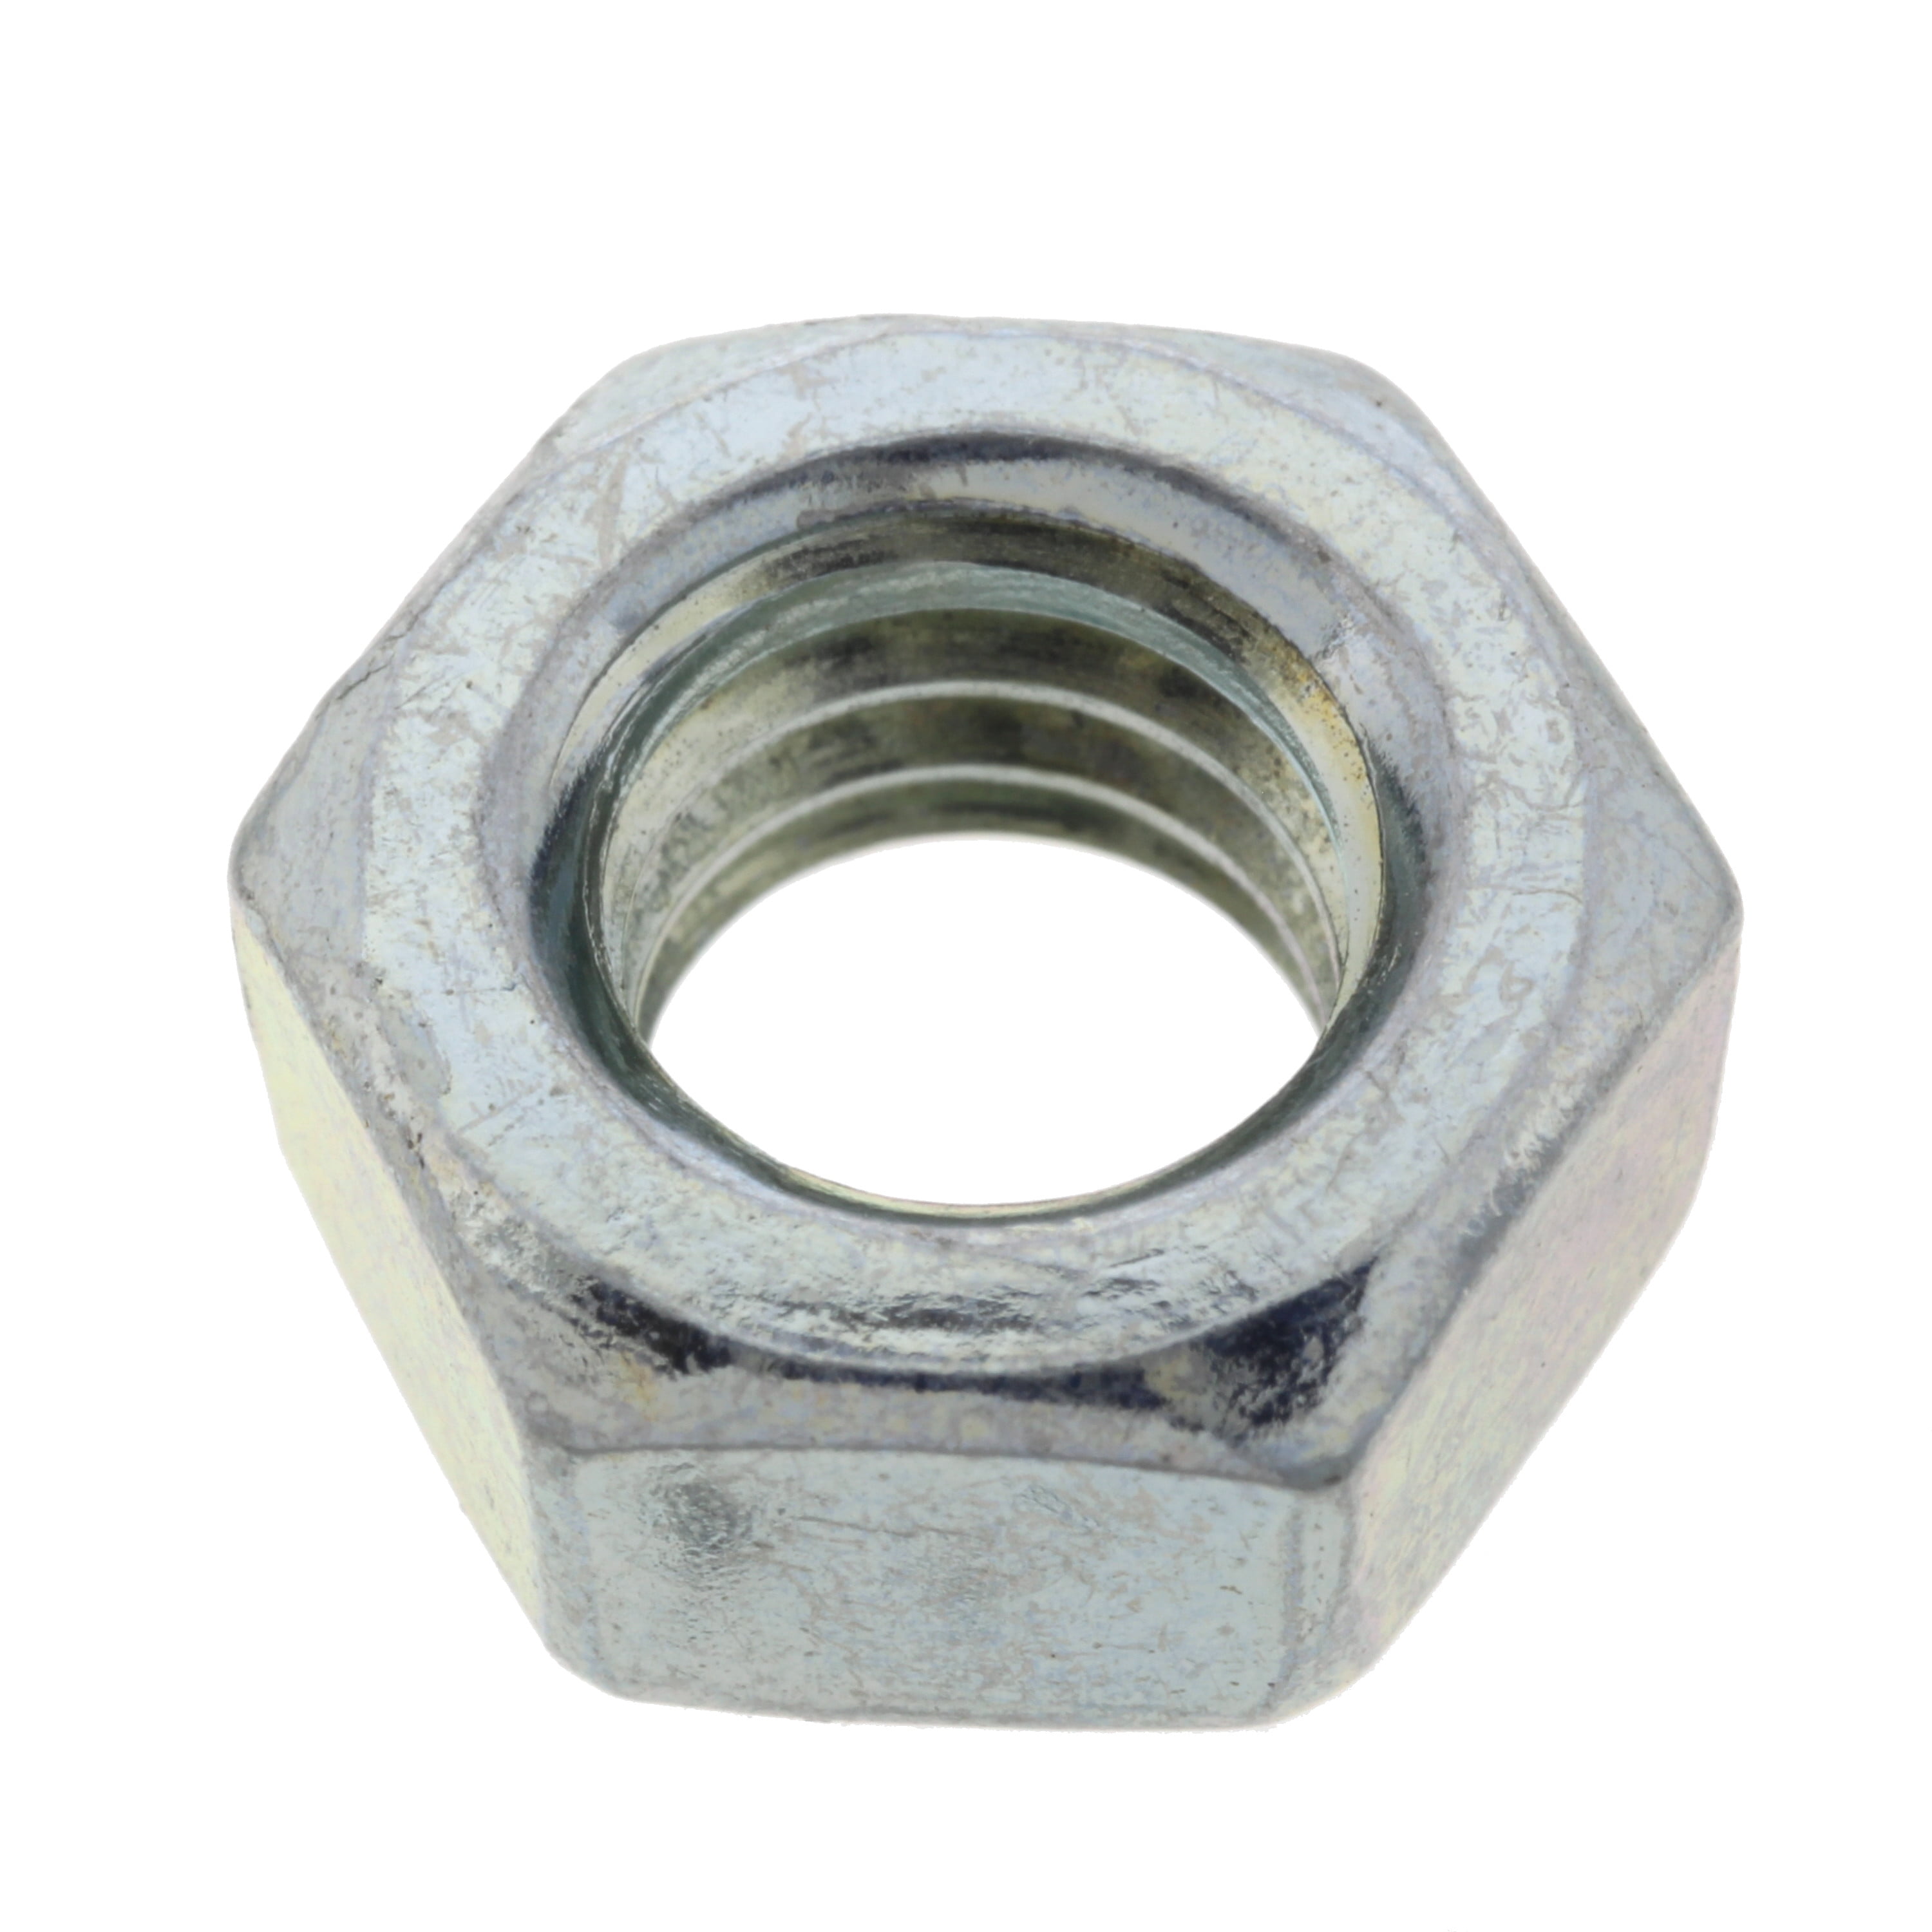 Pack of 10 1-1/4-7 Grade A Zinc Plated Finish Low Carbon Steel Jam Hex Nut, 